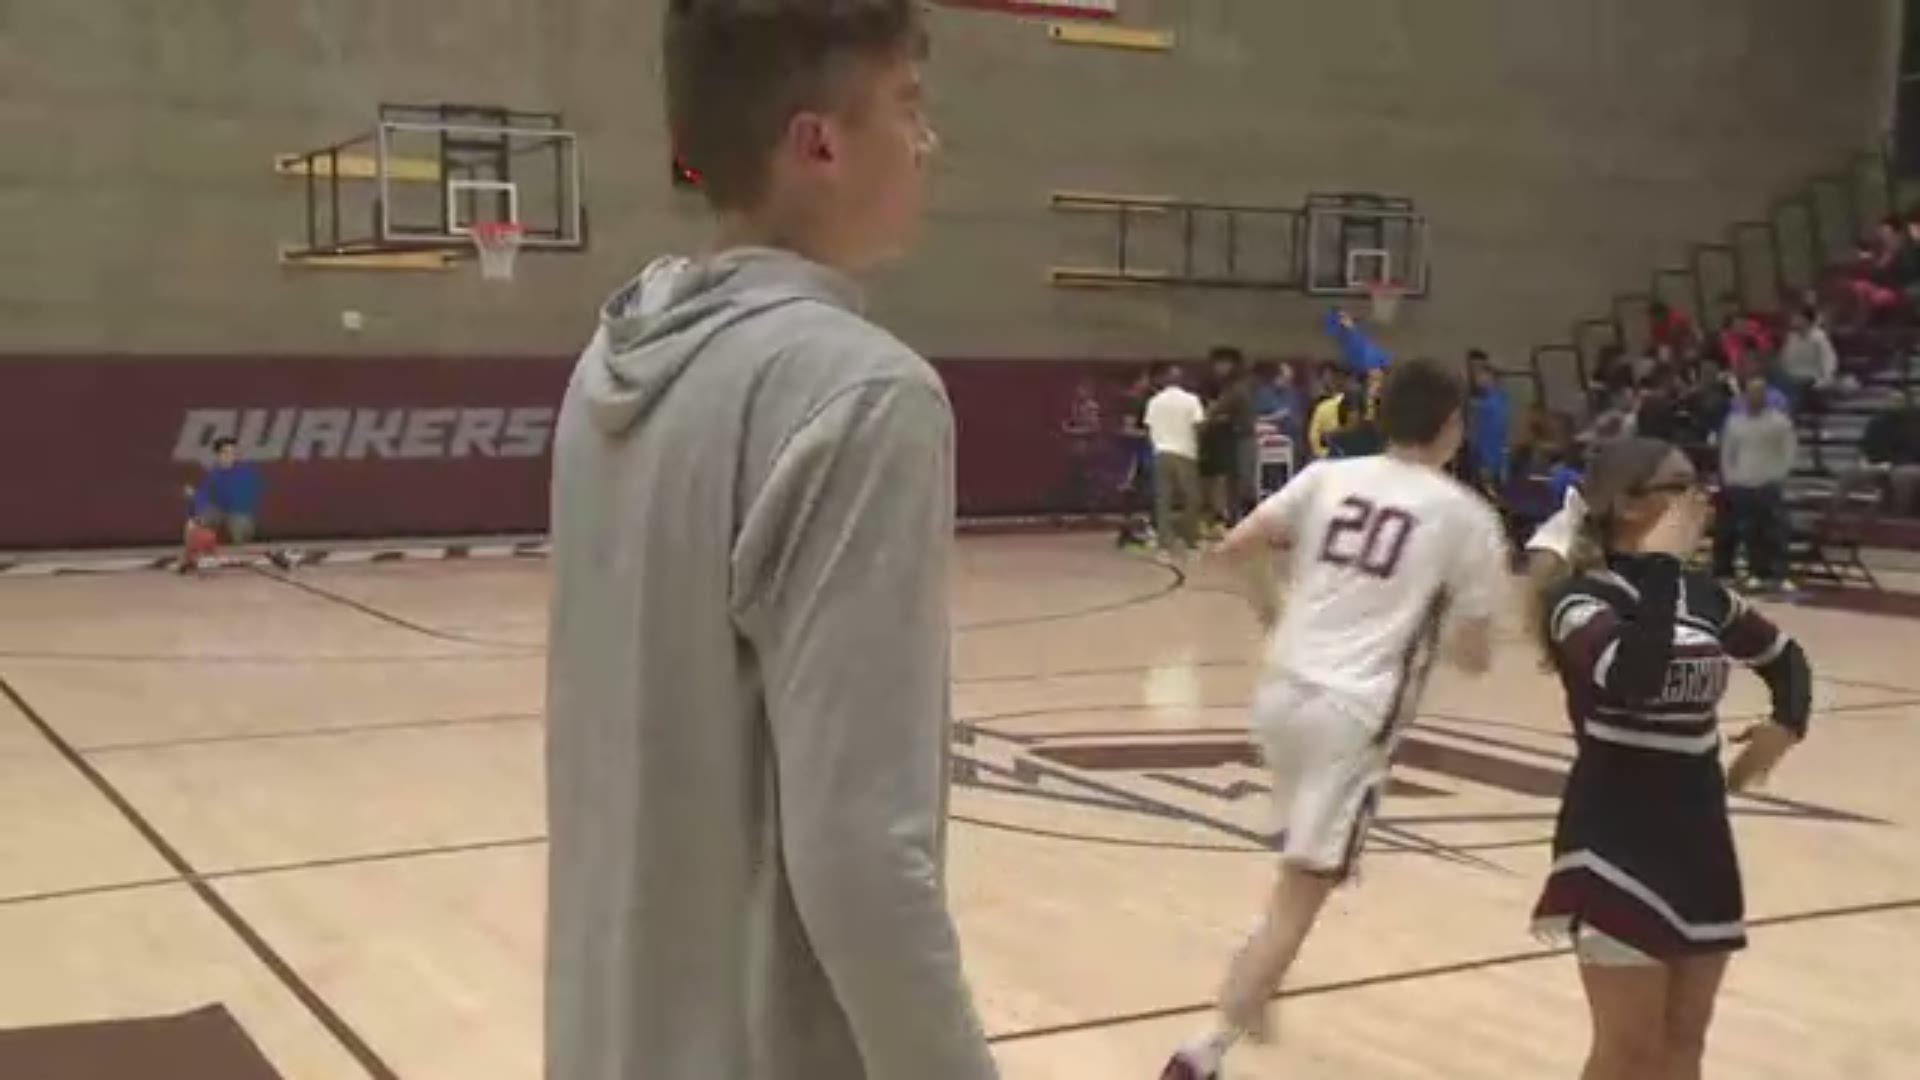 Highlights of the Franklin Quakers 2019 boys basketball team. Highlights were part of KGW’s Friday Night Hoops coverage. #KGWPreps